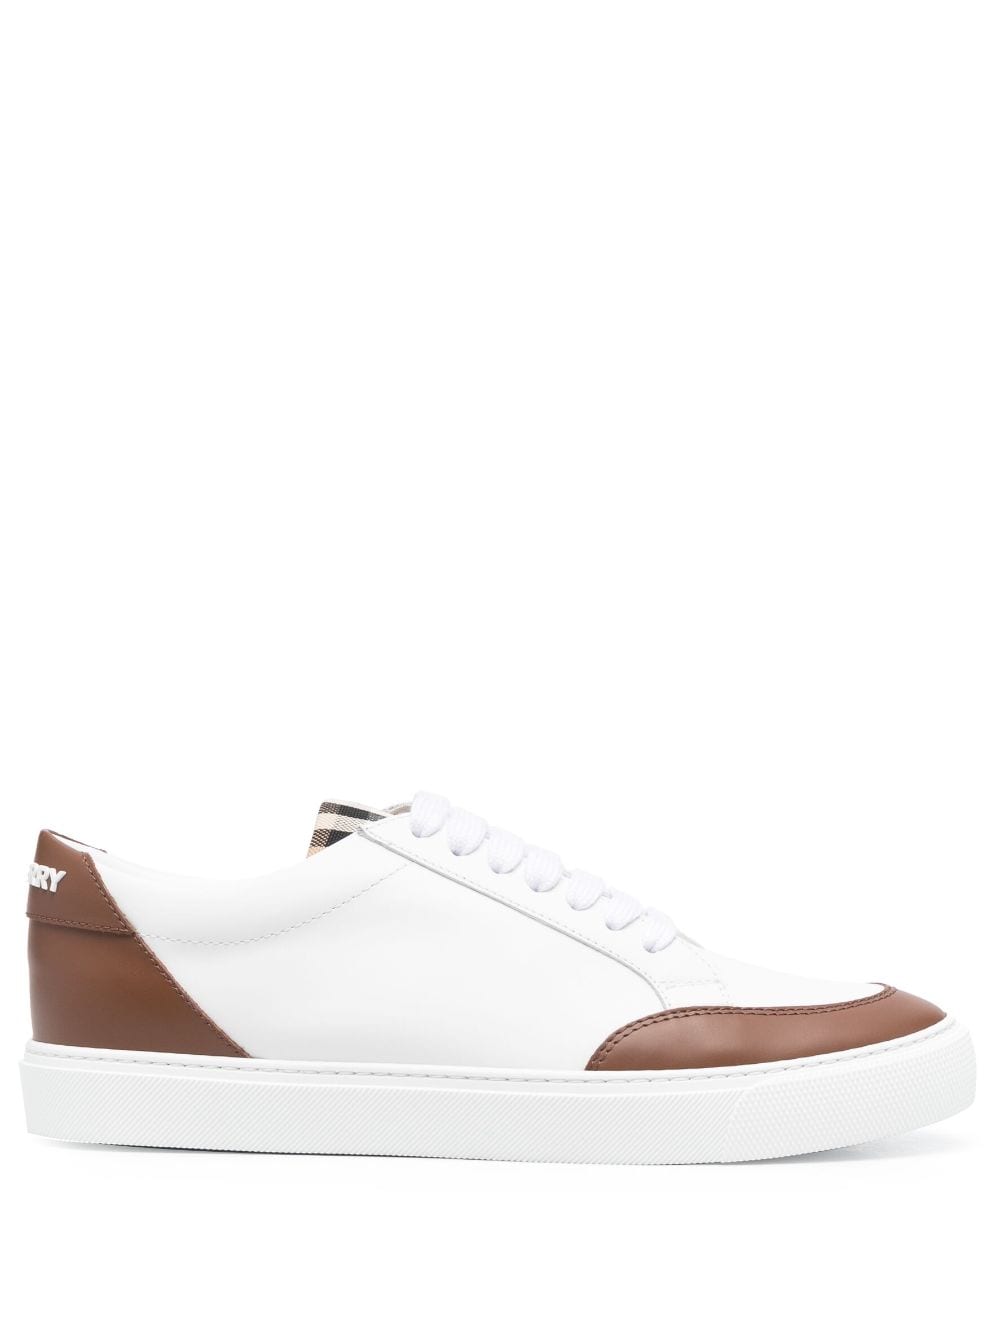 Burberry Vintage Check-pattern leather sneakers - White von Burberry